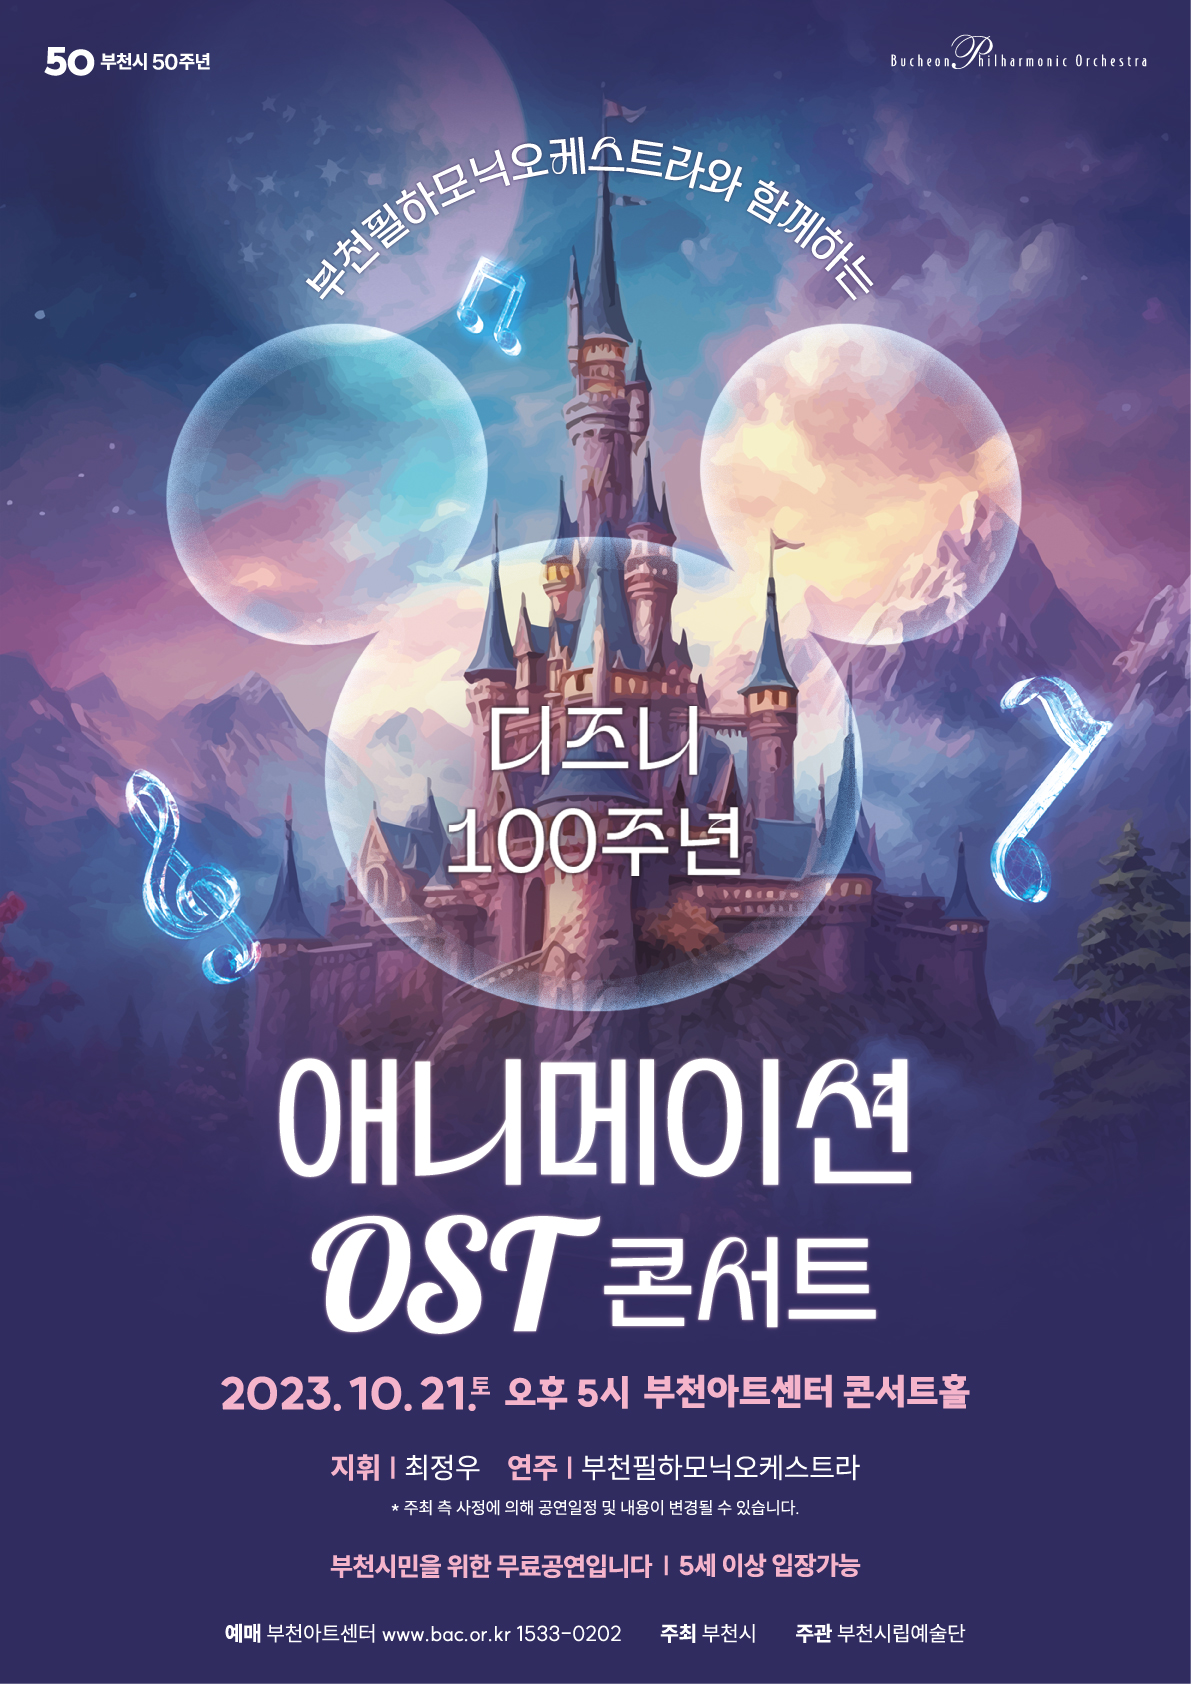 [10.21]Bucheon Philharmonic Orchestra Animation OST Concert with Disney